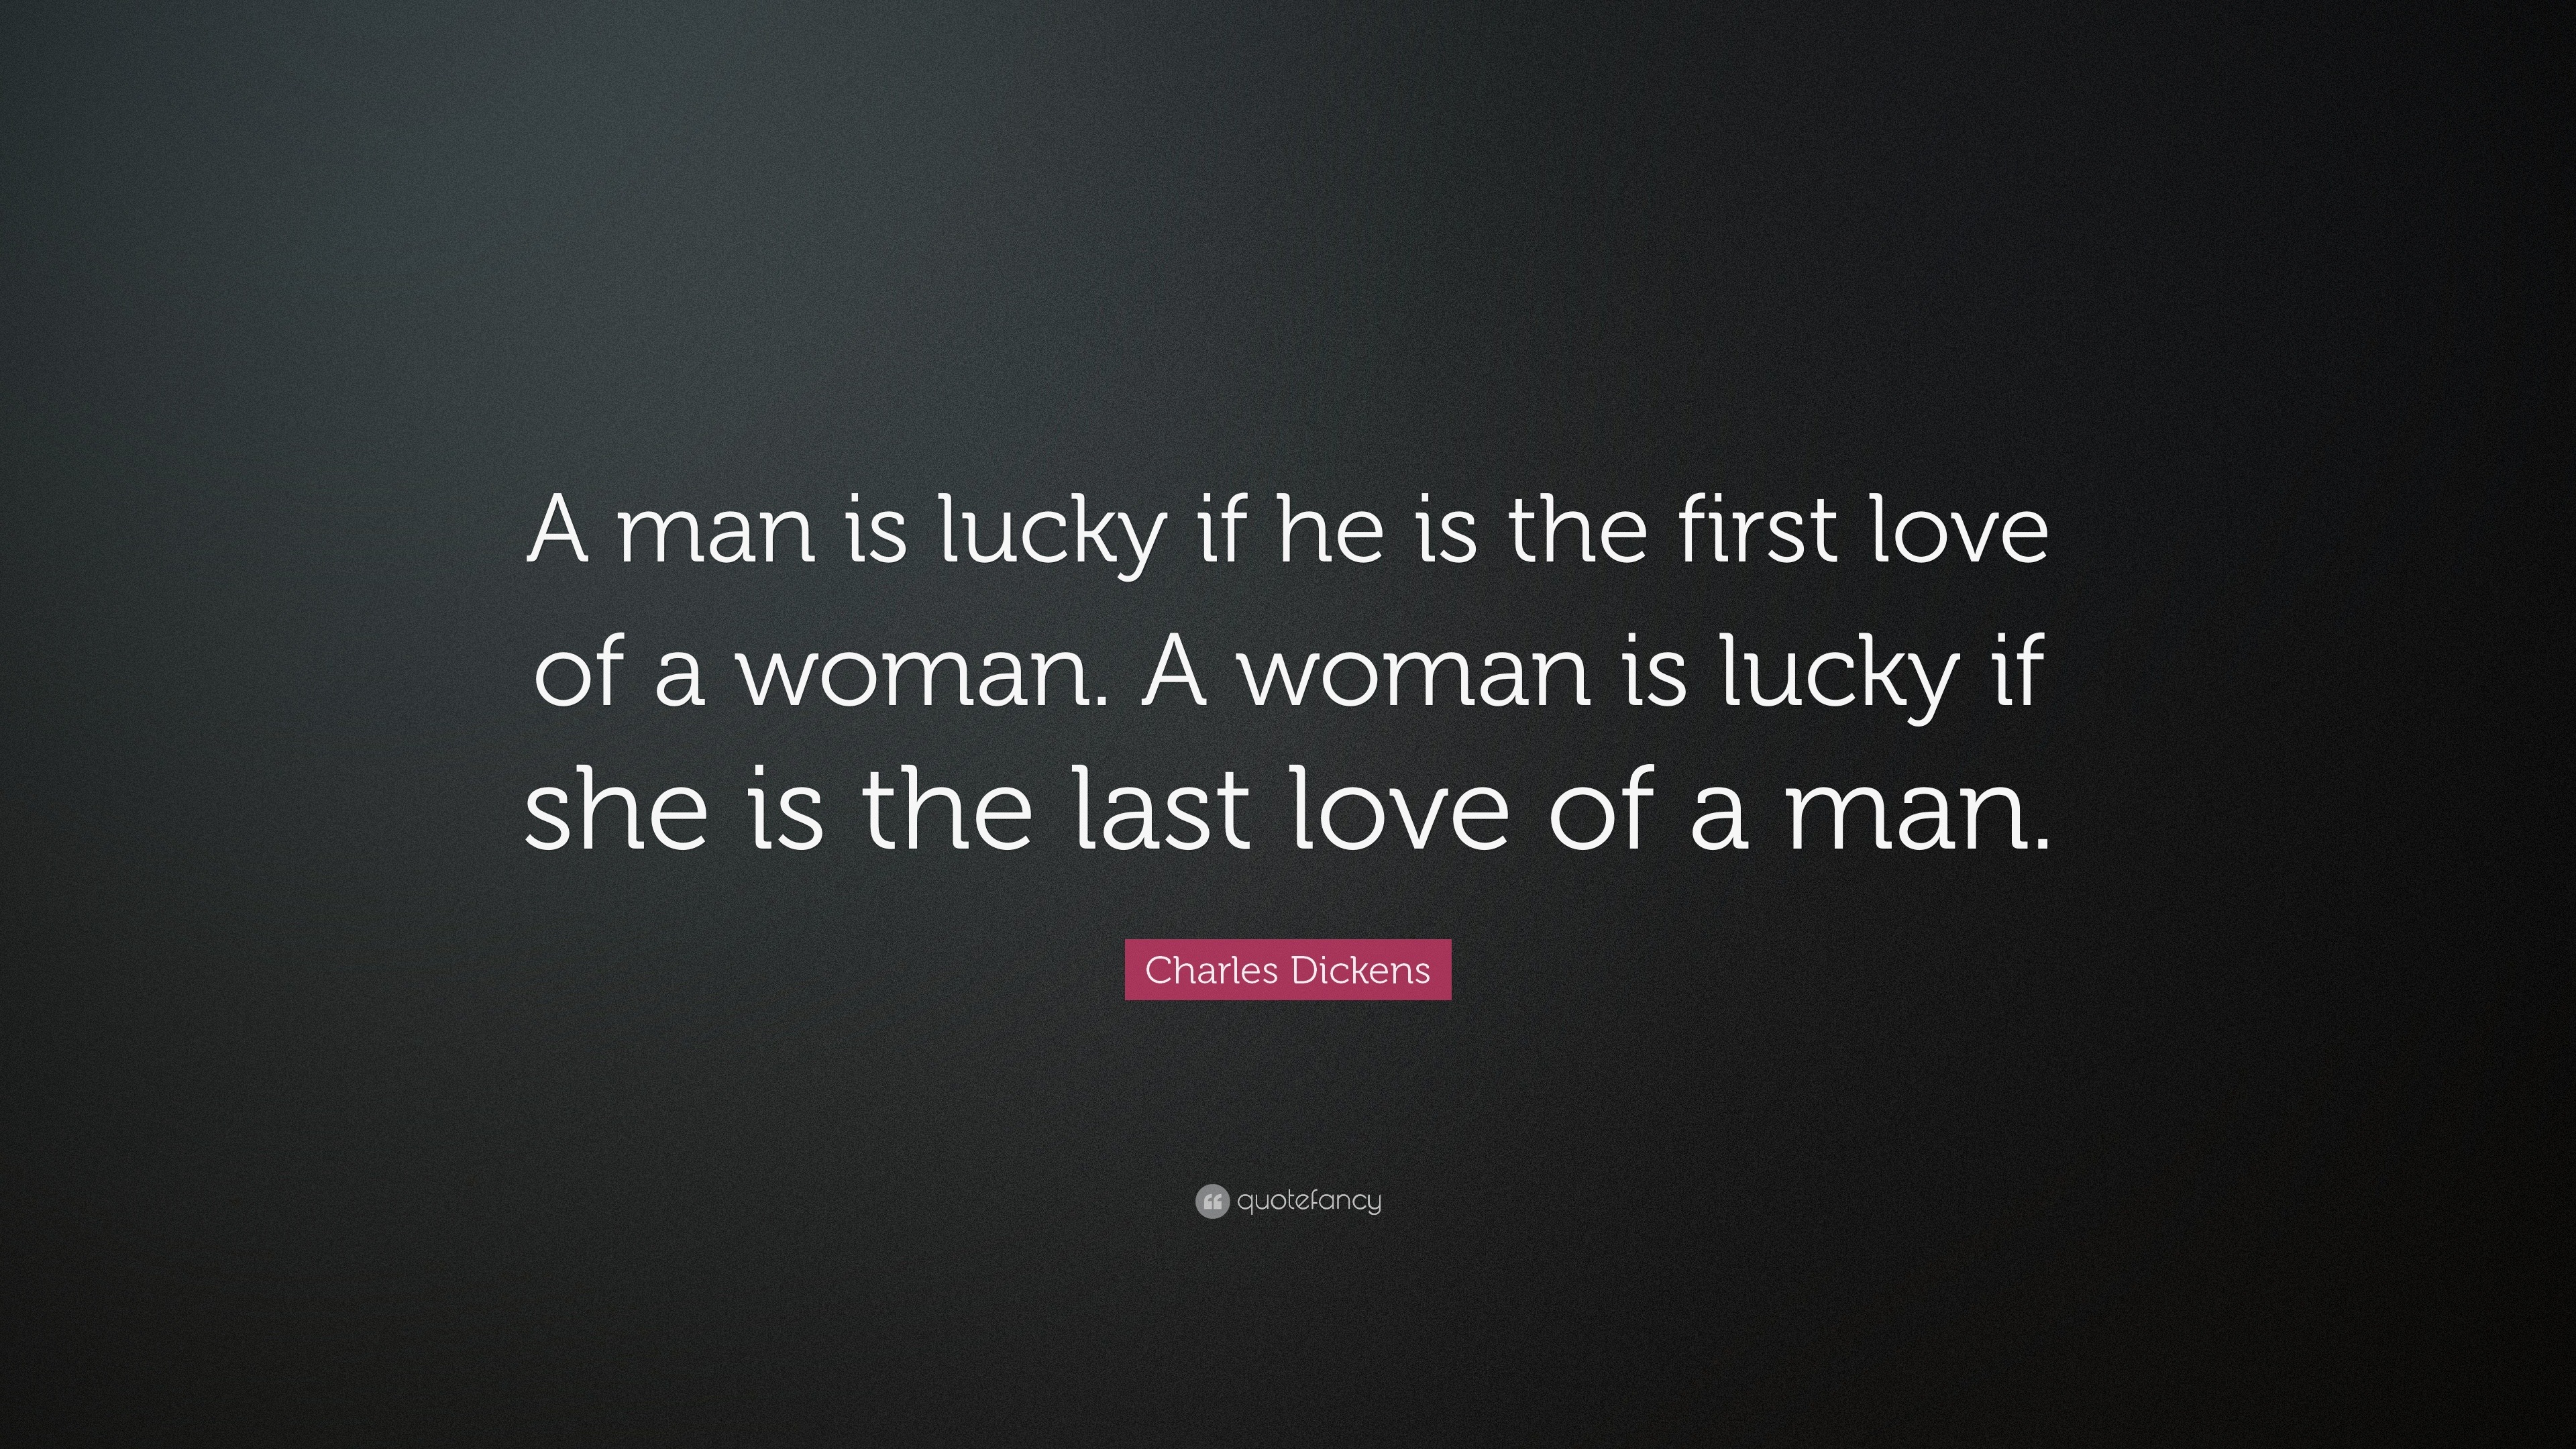 Charles Dickens Quote A man is lucky if he is the first love of